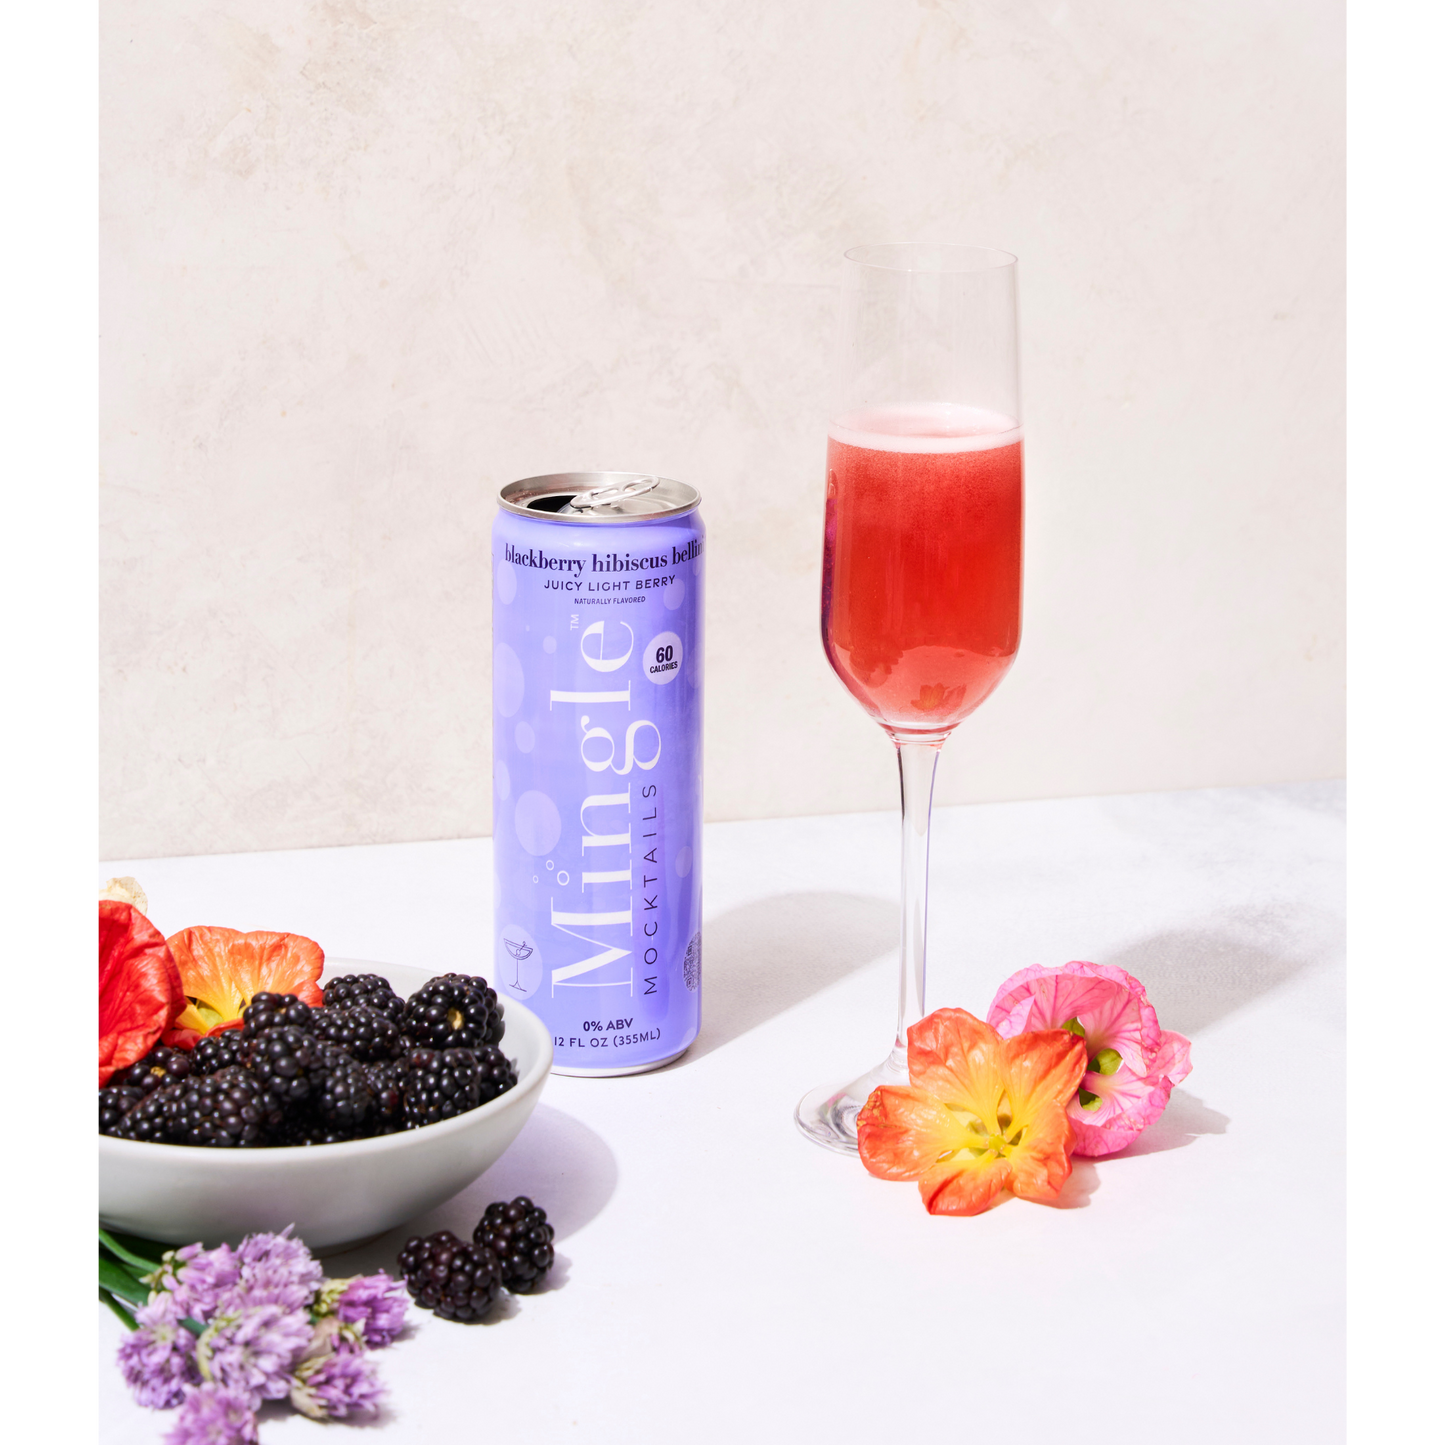 Blackberry Hibiscus Bellini by Mingle Mocktails - Non Alcoholic Beverages